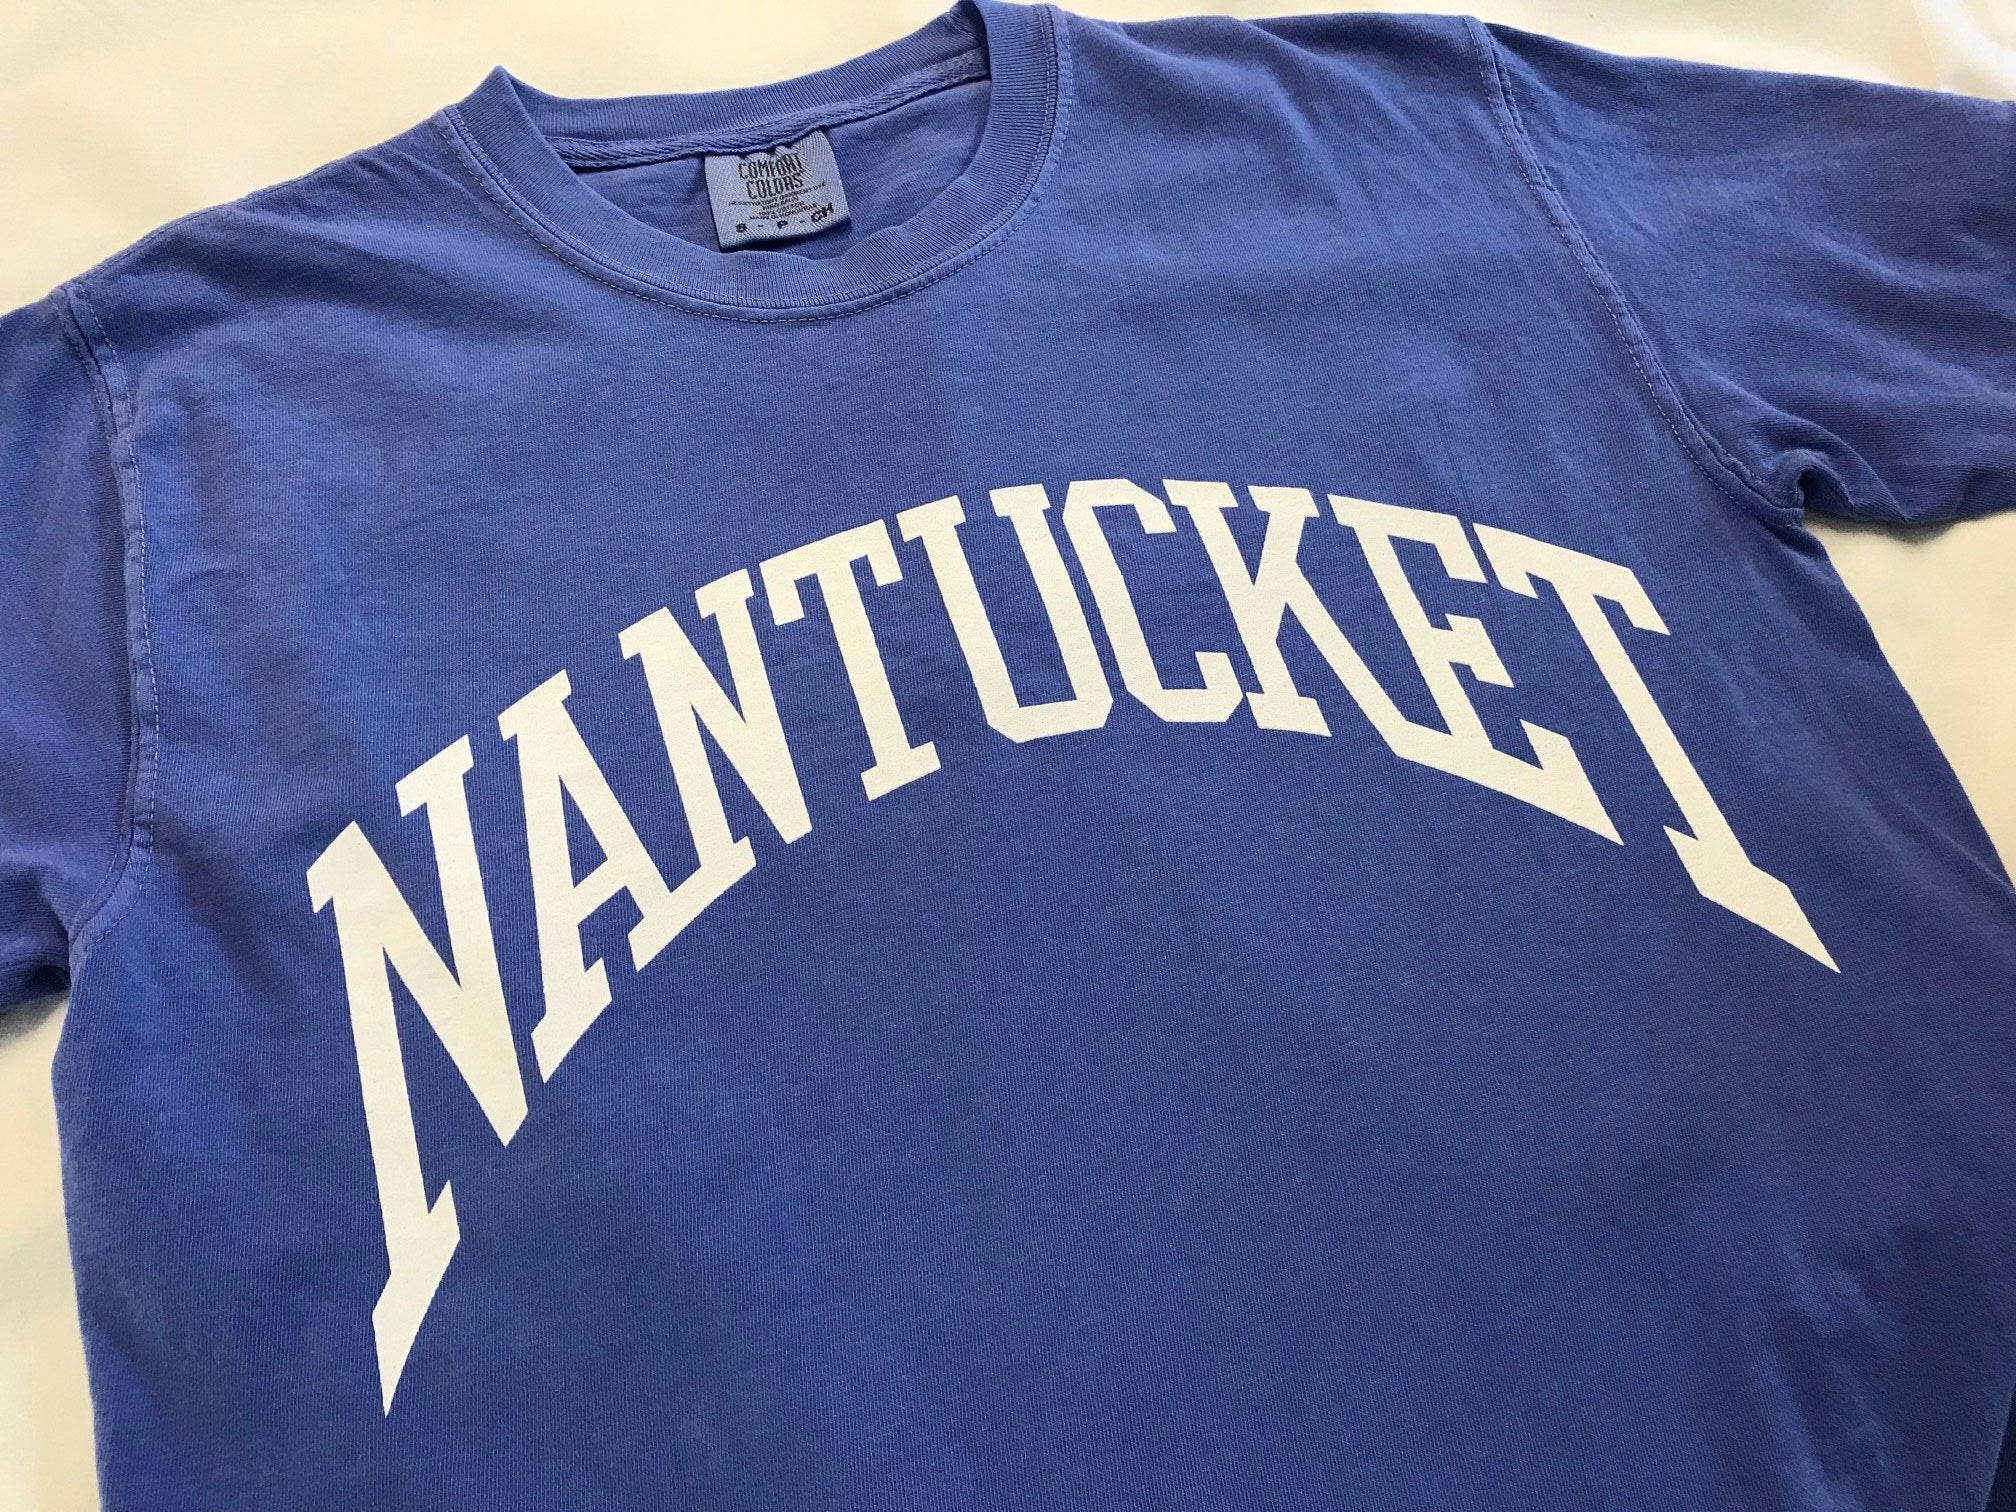 Nantucket Arch tee by Comfort Colors in Island Red